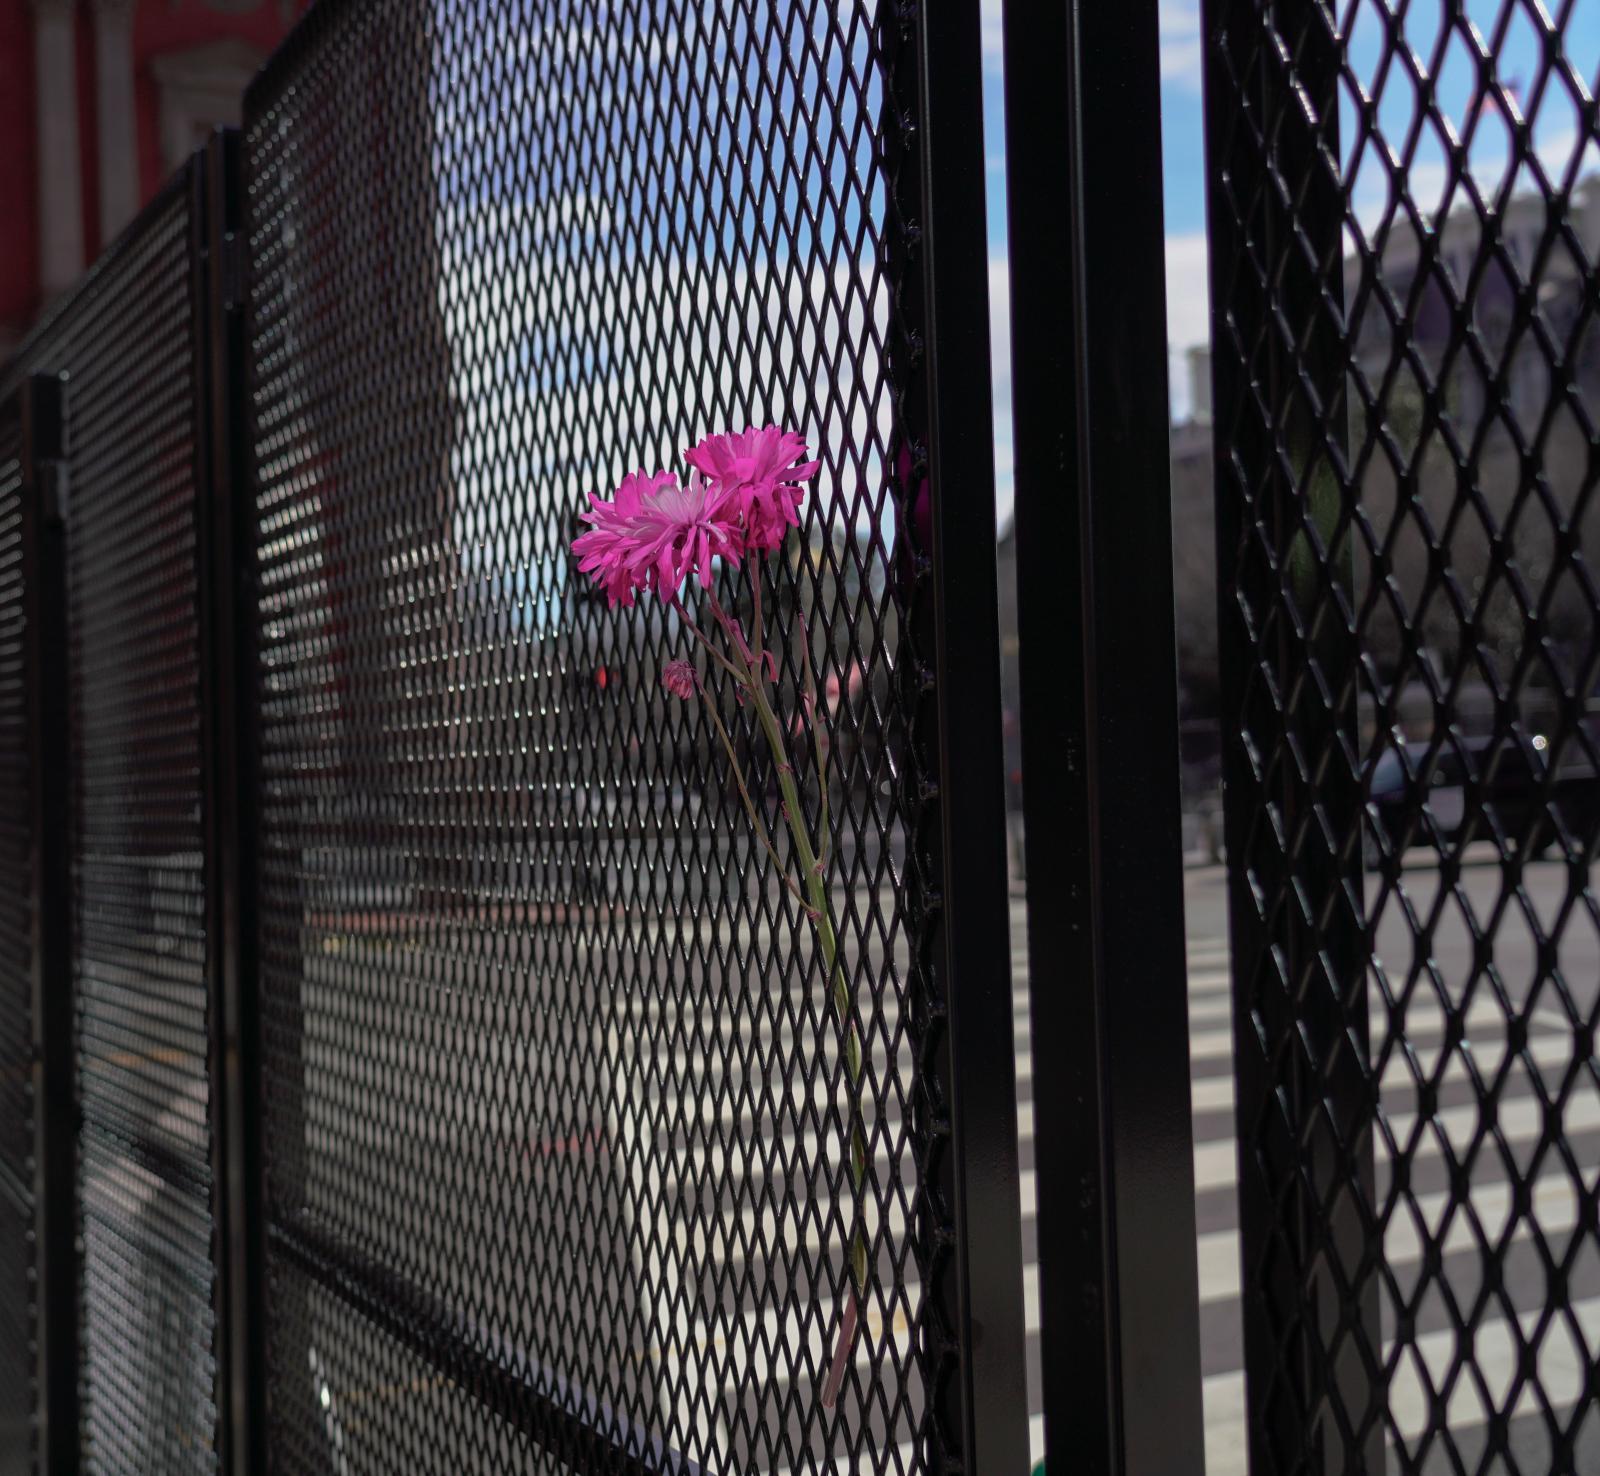 Flowers hang from a security fe...perimeter of the National Mall.